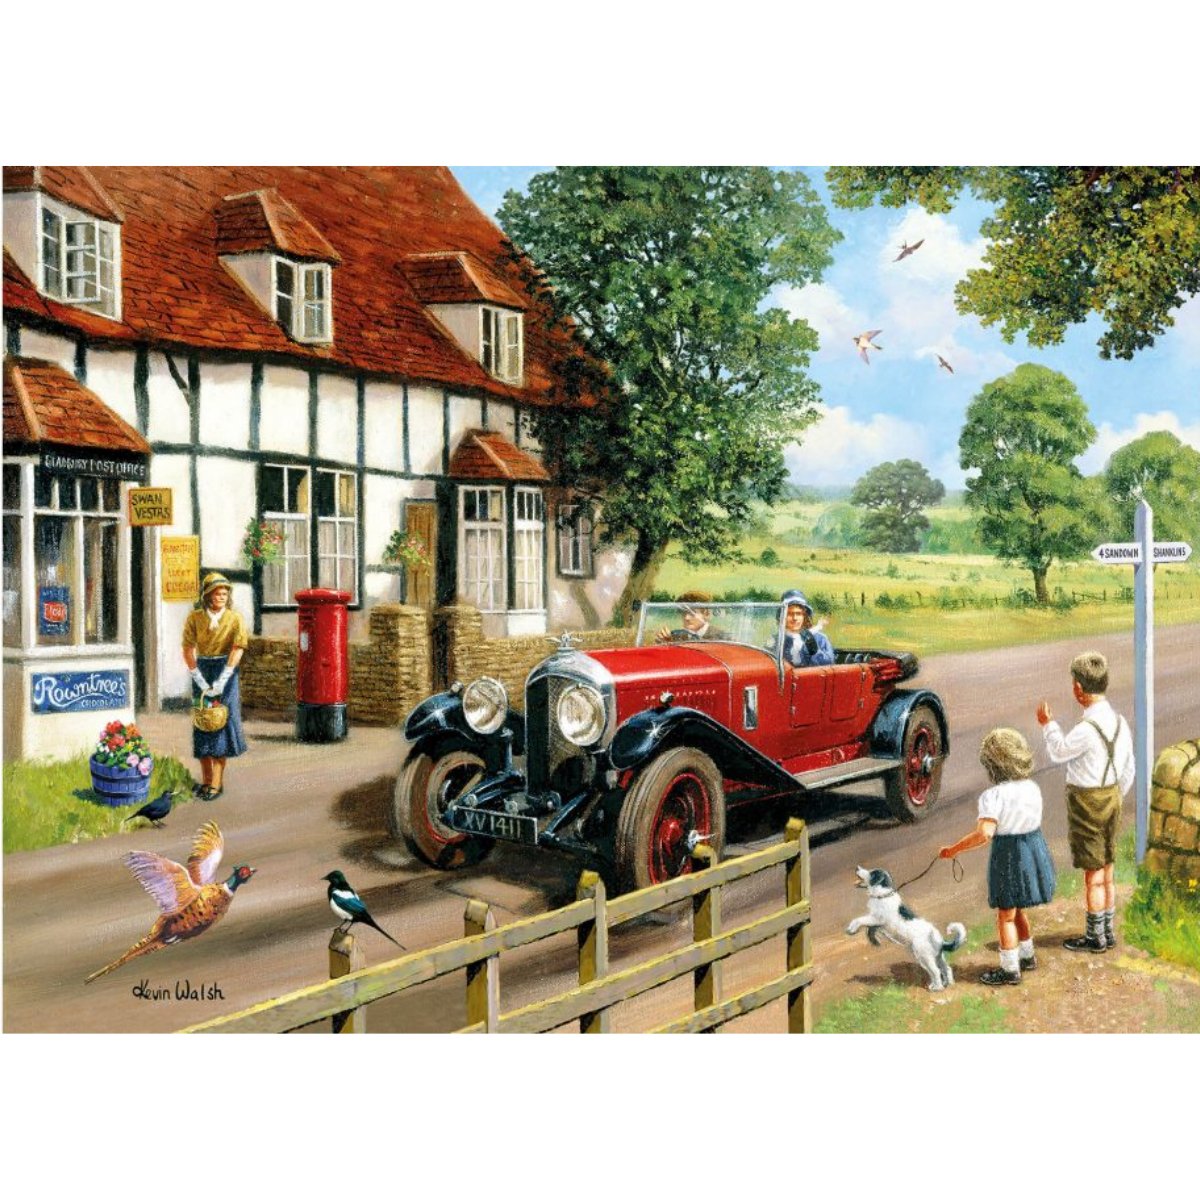 Kevin Walsh Nostalgia Out In The Country Jigsaw Puzzle (1000 Pieces)